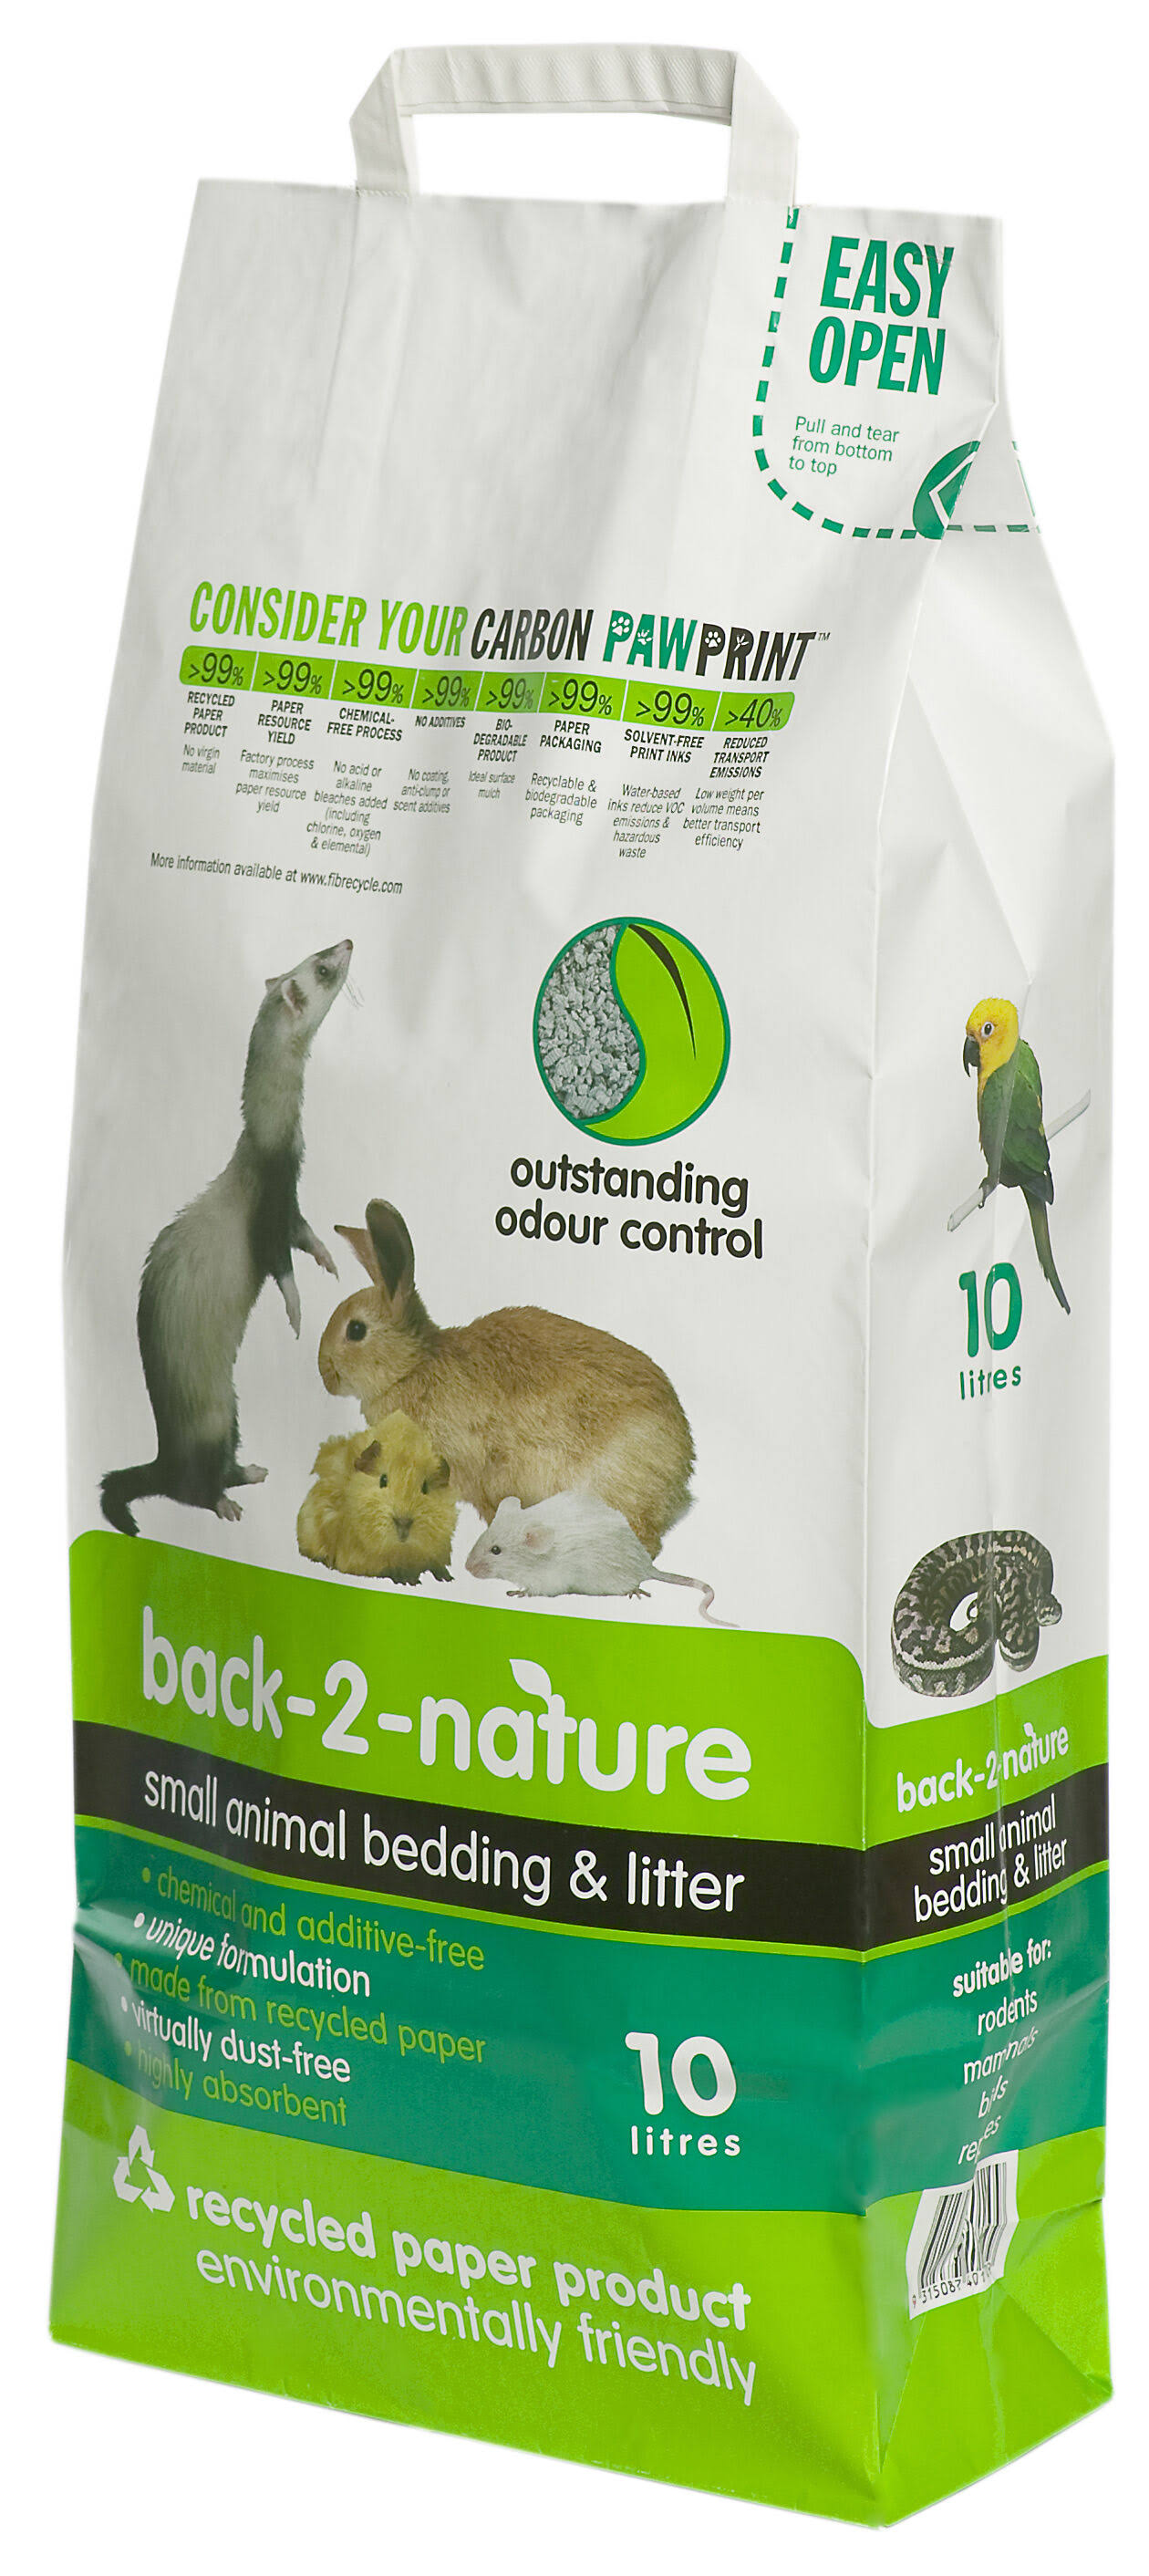 Back 2 Nature Small Animal Bedding & Litter - 30 L